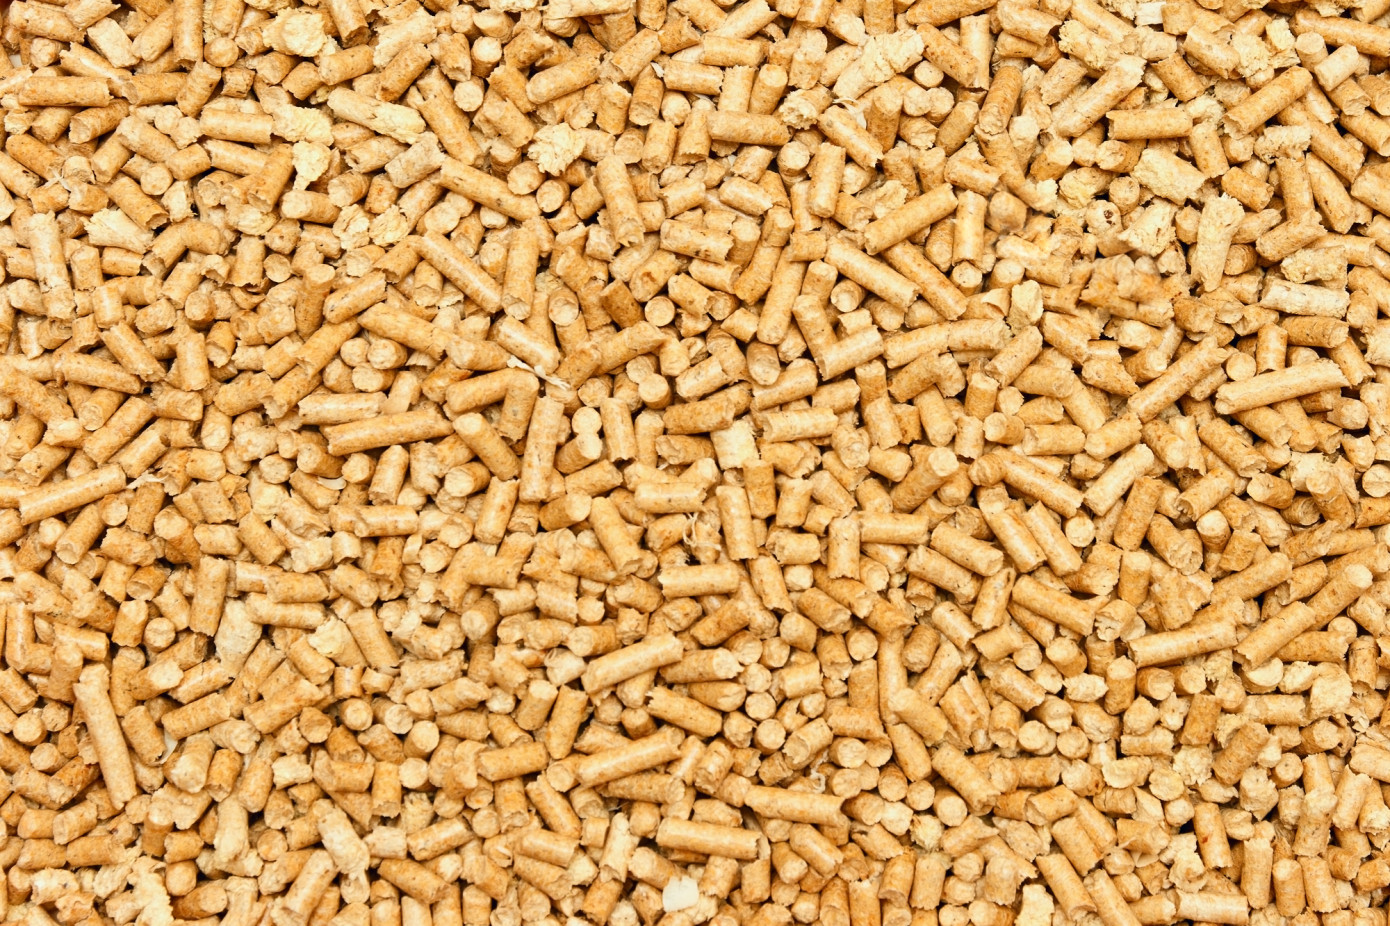 Exports of wood pellets from Russia to South Korea surge tenfold in December